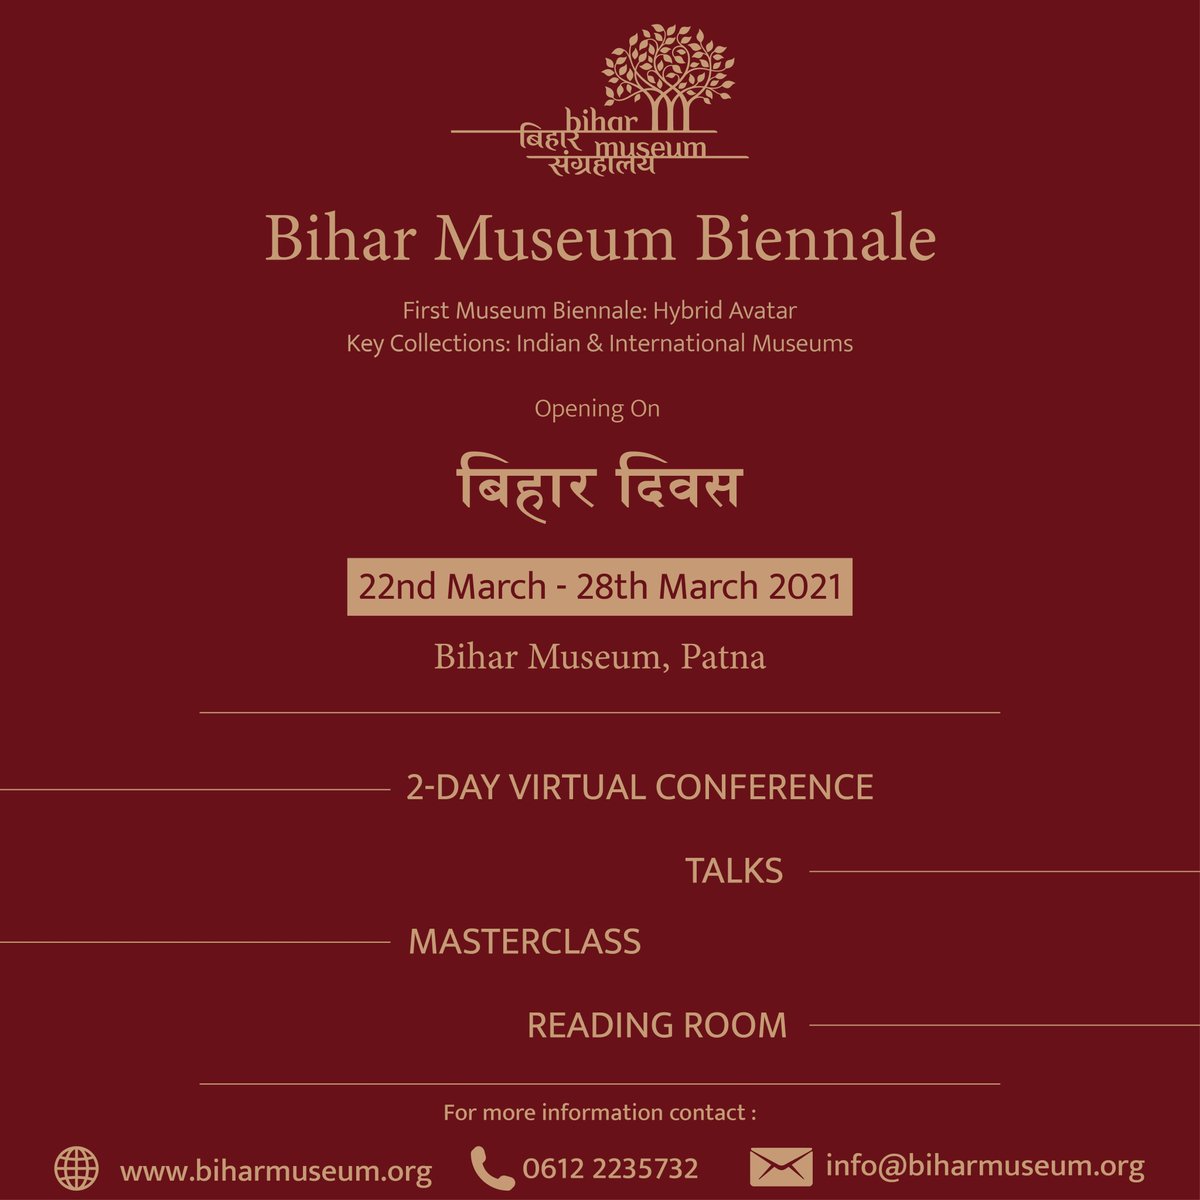 Bihar Museum Biennale is a virtual event from the 22nd to 28th of March. It will host 2 day virtual conference : Connecting People Connecting Cultures. Master classes as well. You may cherry pick what you'd like to be a part of. Look forward to meeting you virtually!